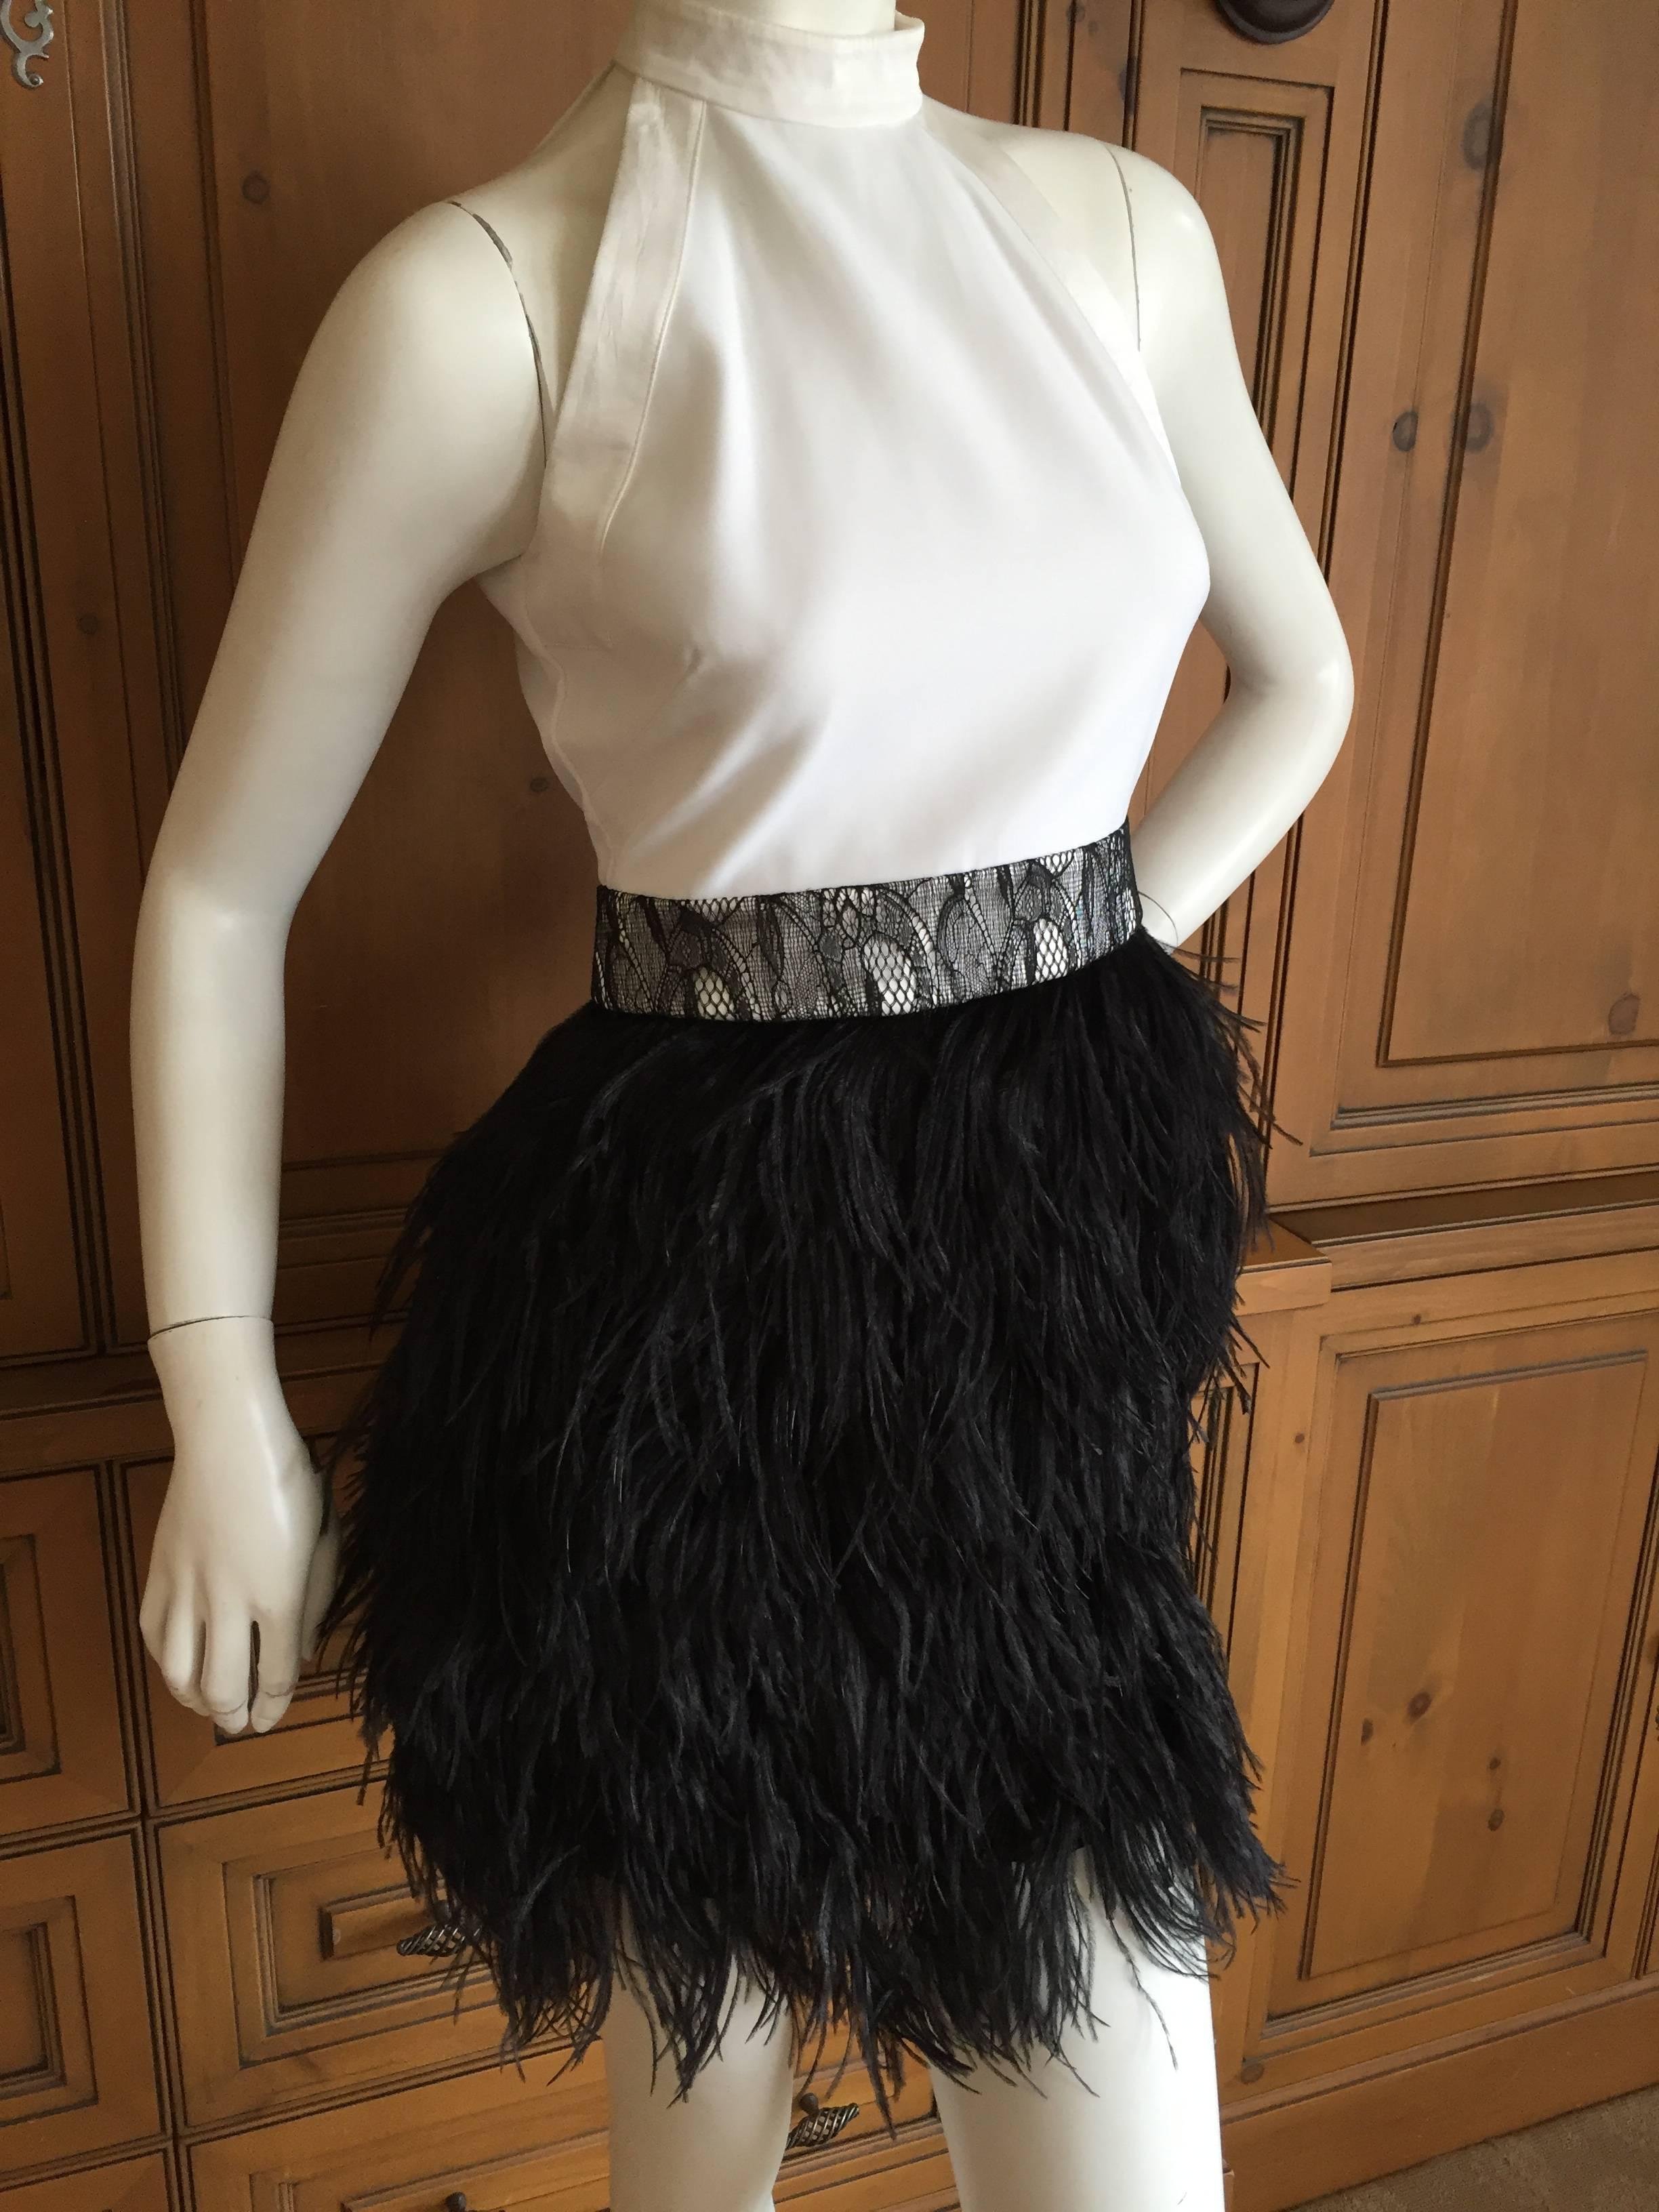 Delightful cocktail dress with feather skirt from Givenchy by Riccardo Tisci 2011.
Size 36
Bust 35